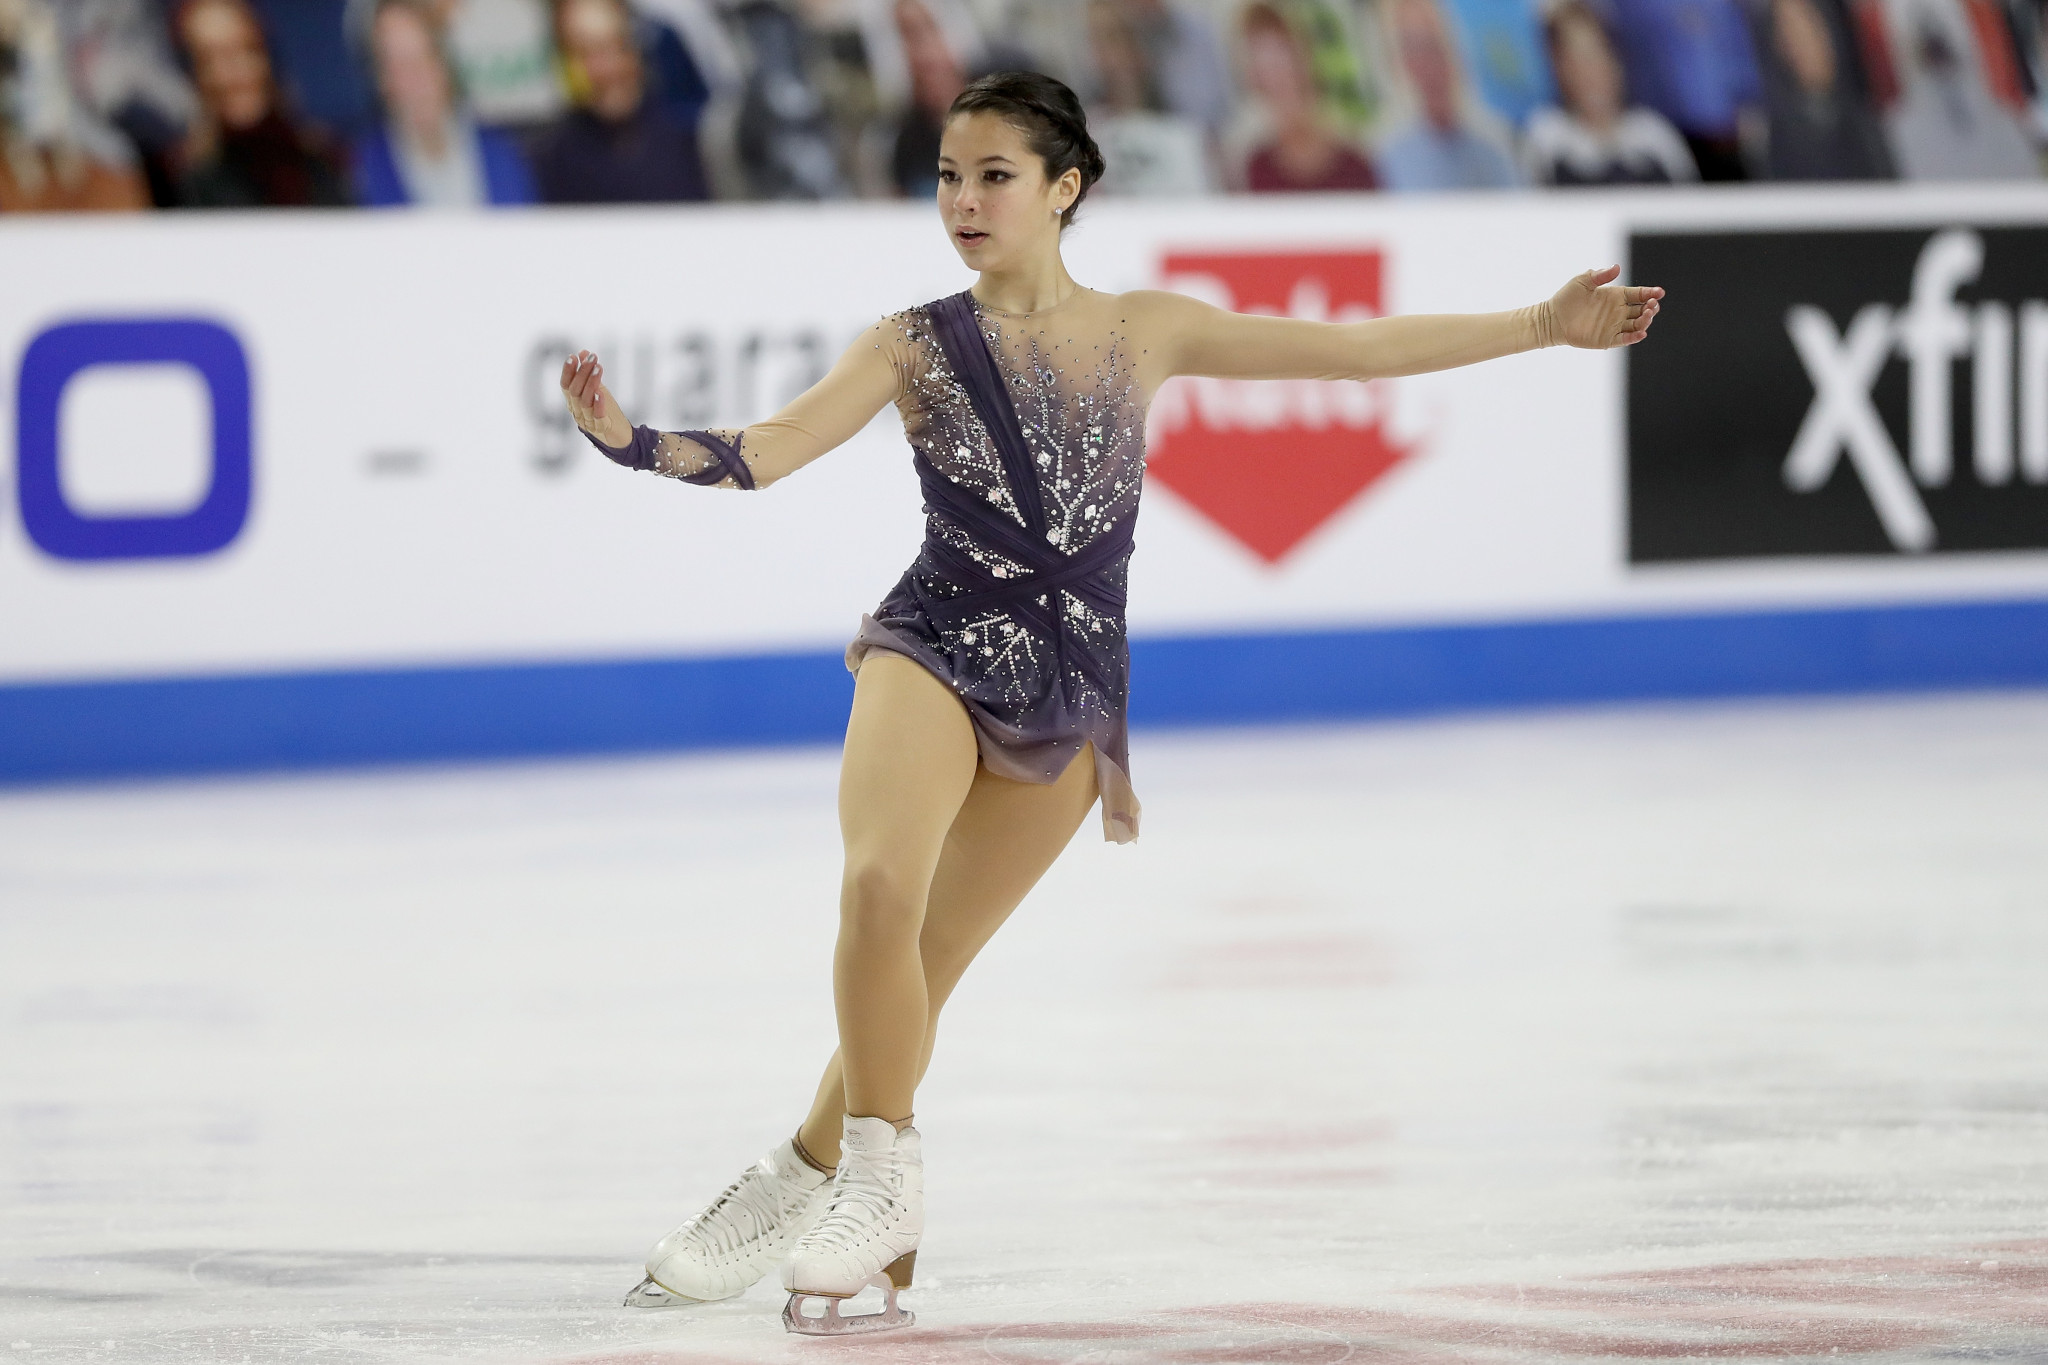 Alysa Liu has put herself in a strong position to qualify for the Beijing 2022 Winter Olympics ©Getty Images